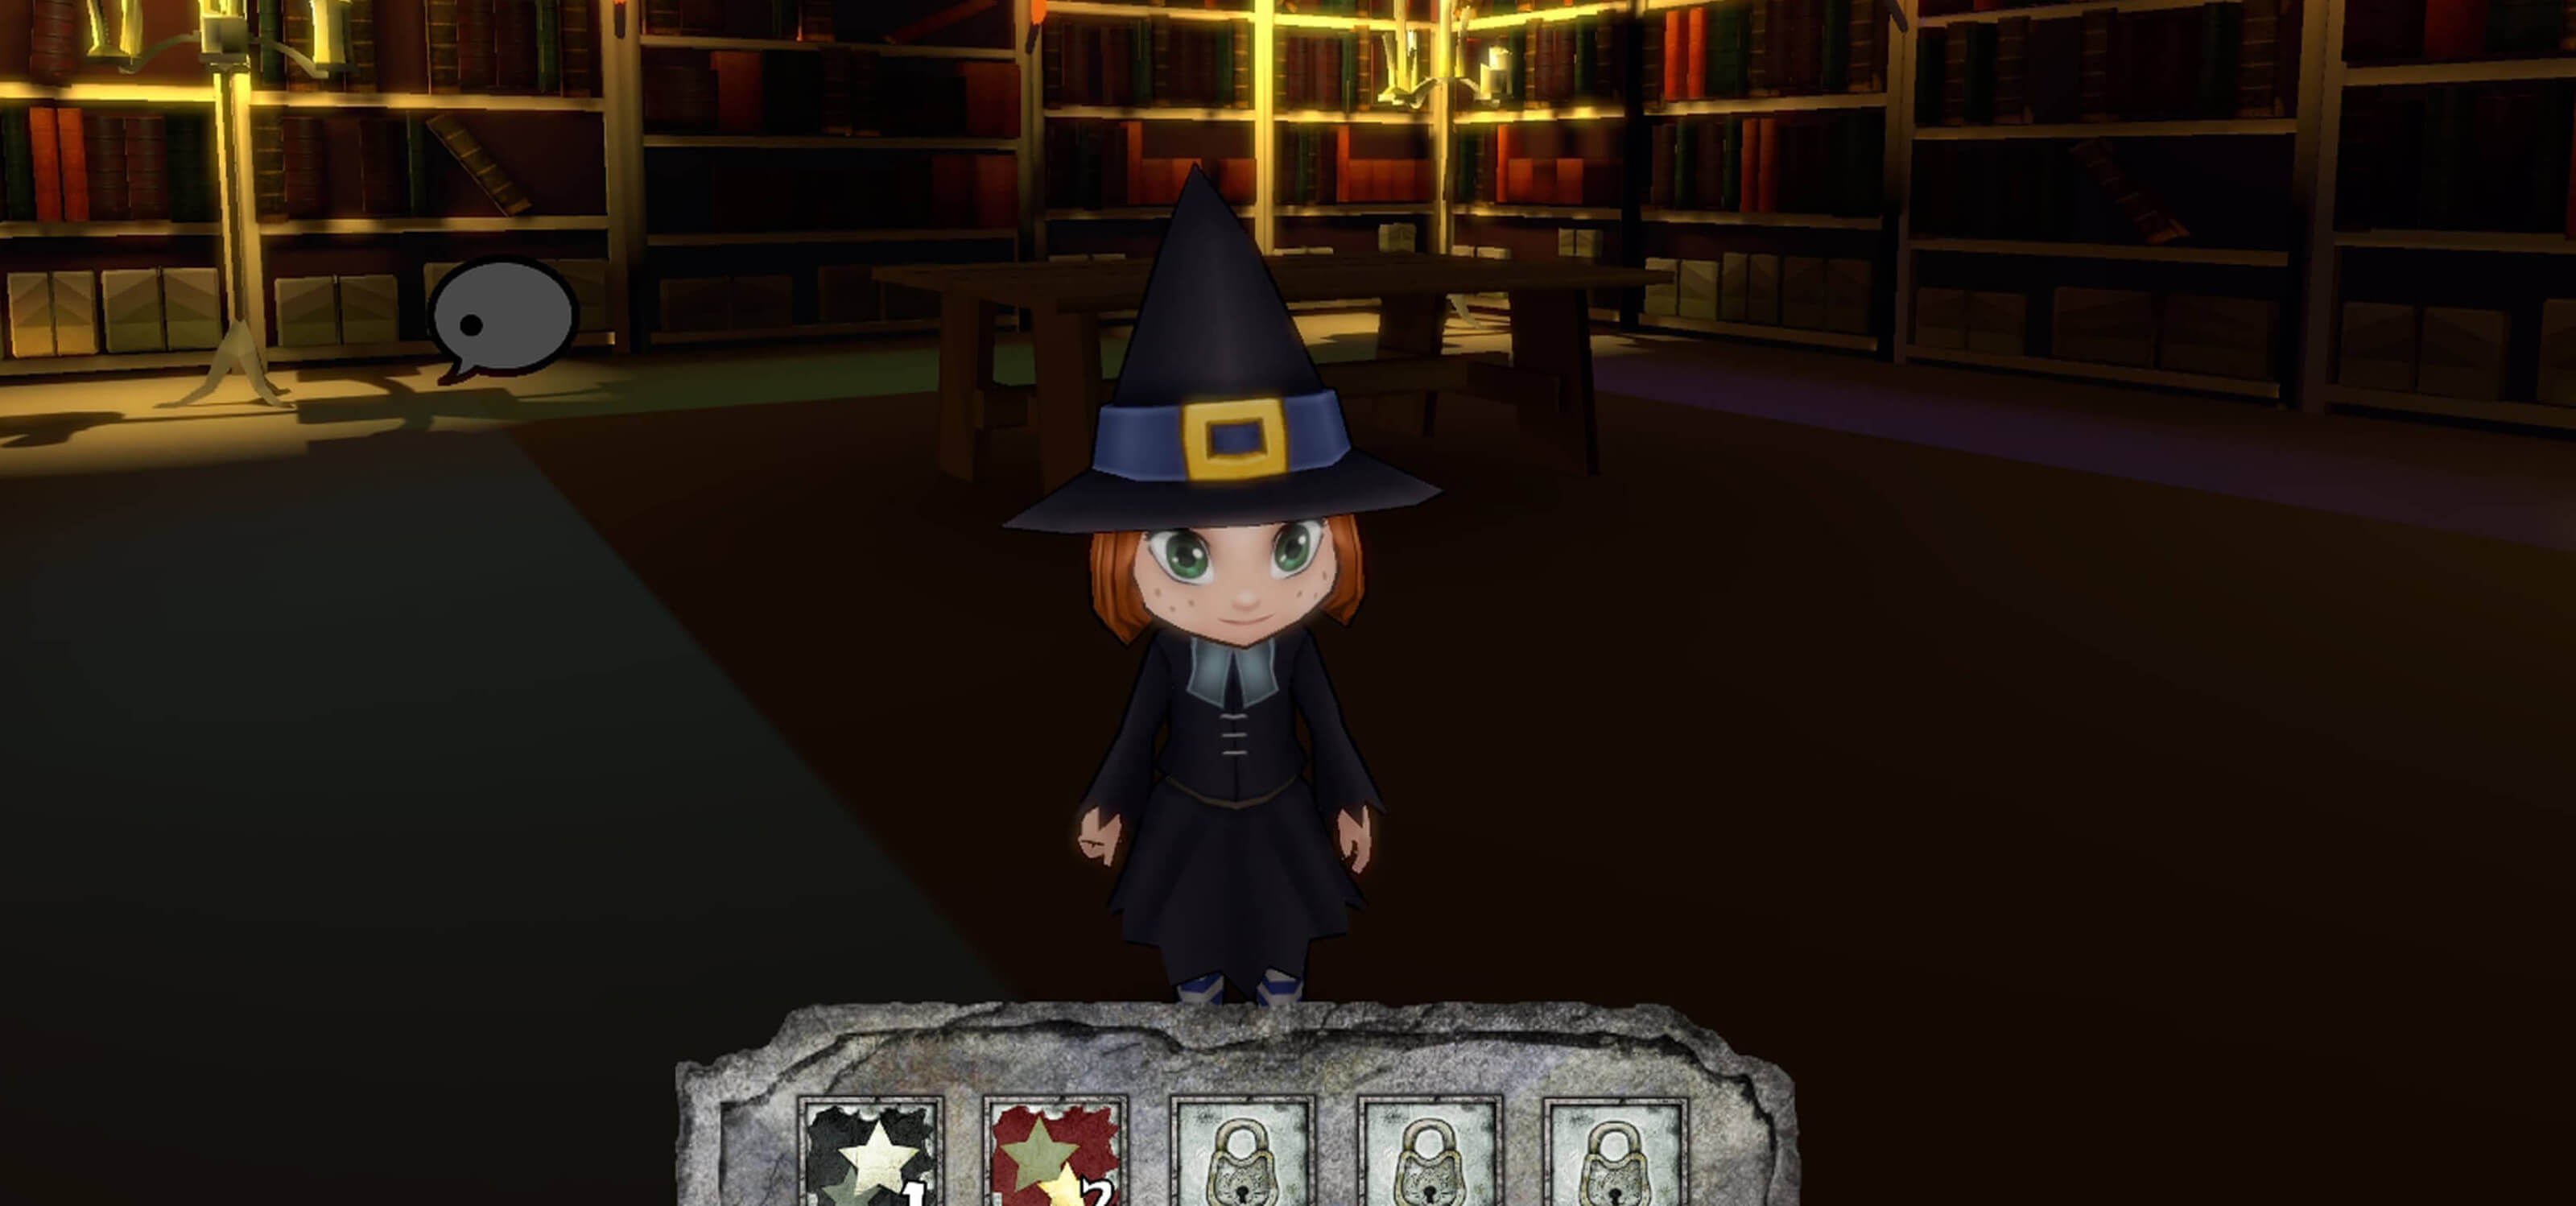 Screenshot of main game character Sorgina, a young witch&#039;s apprentice, in a darkened library